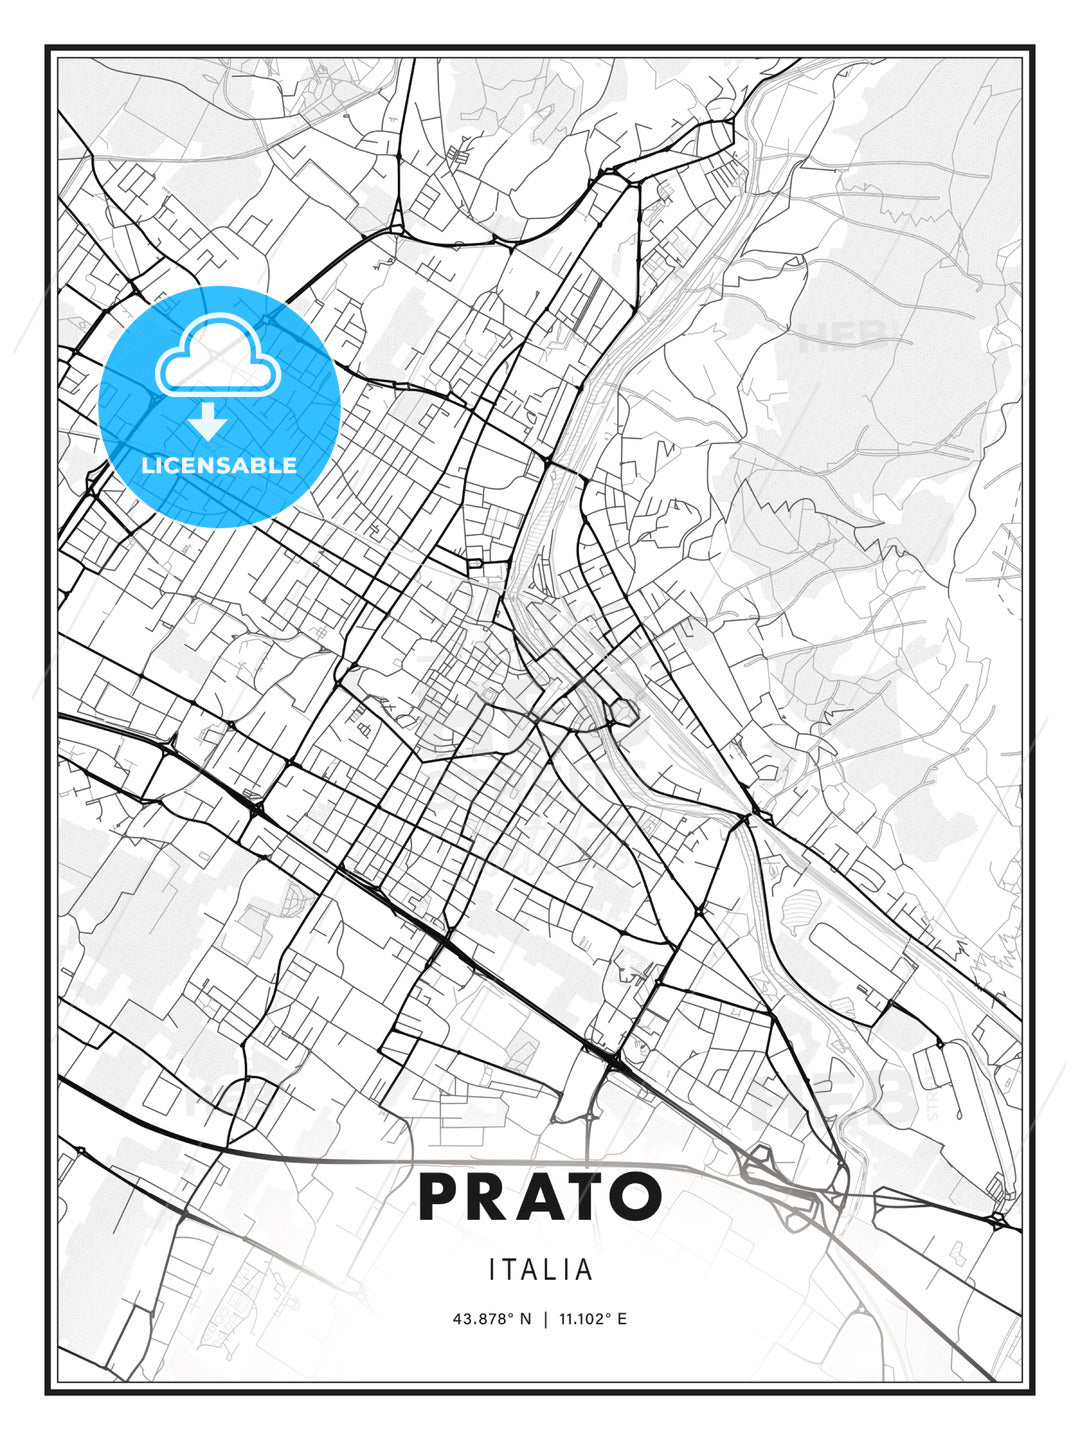 Prato, Italy, Modern Print Template in Various Formats - HEBSTREITS Sketches